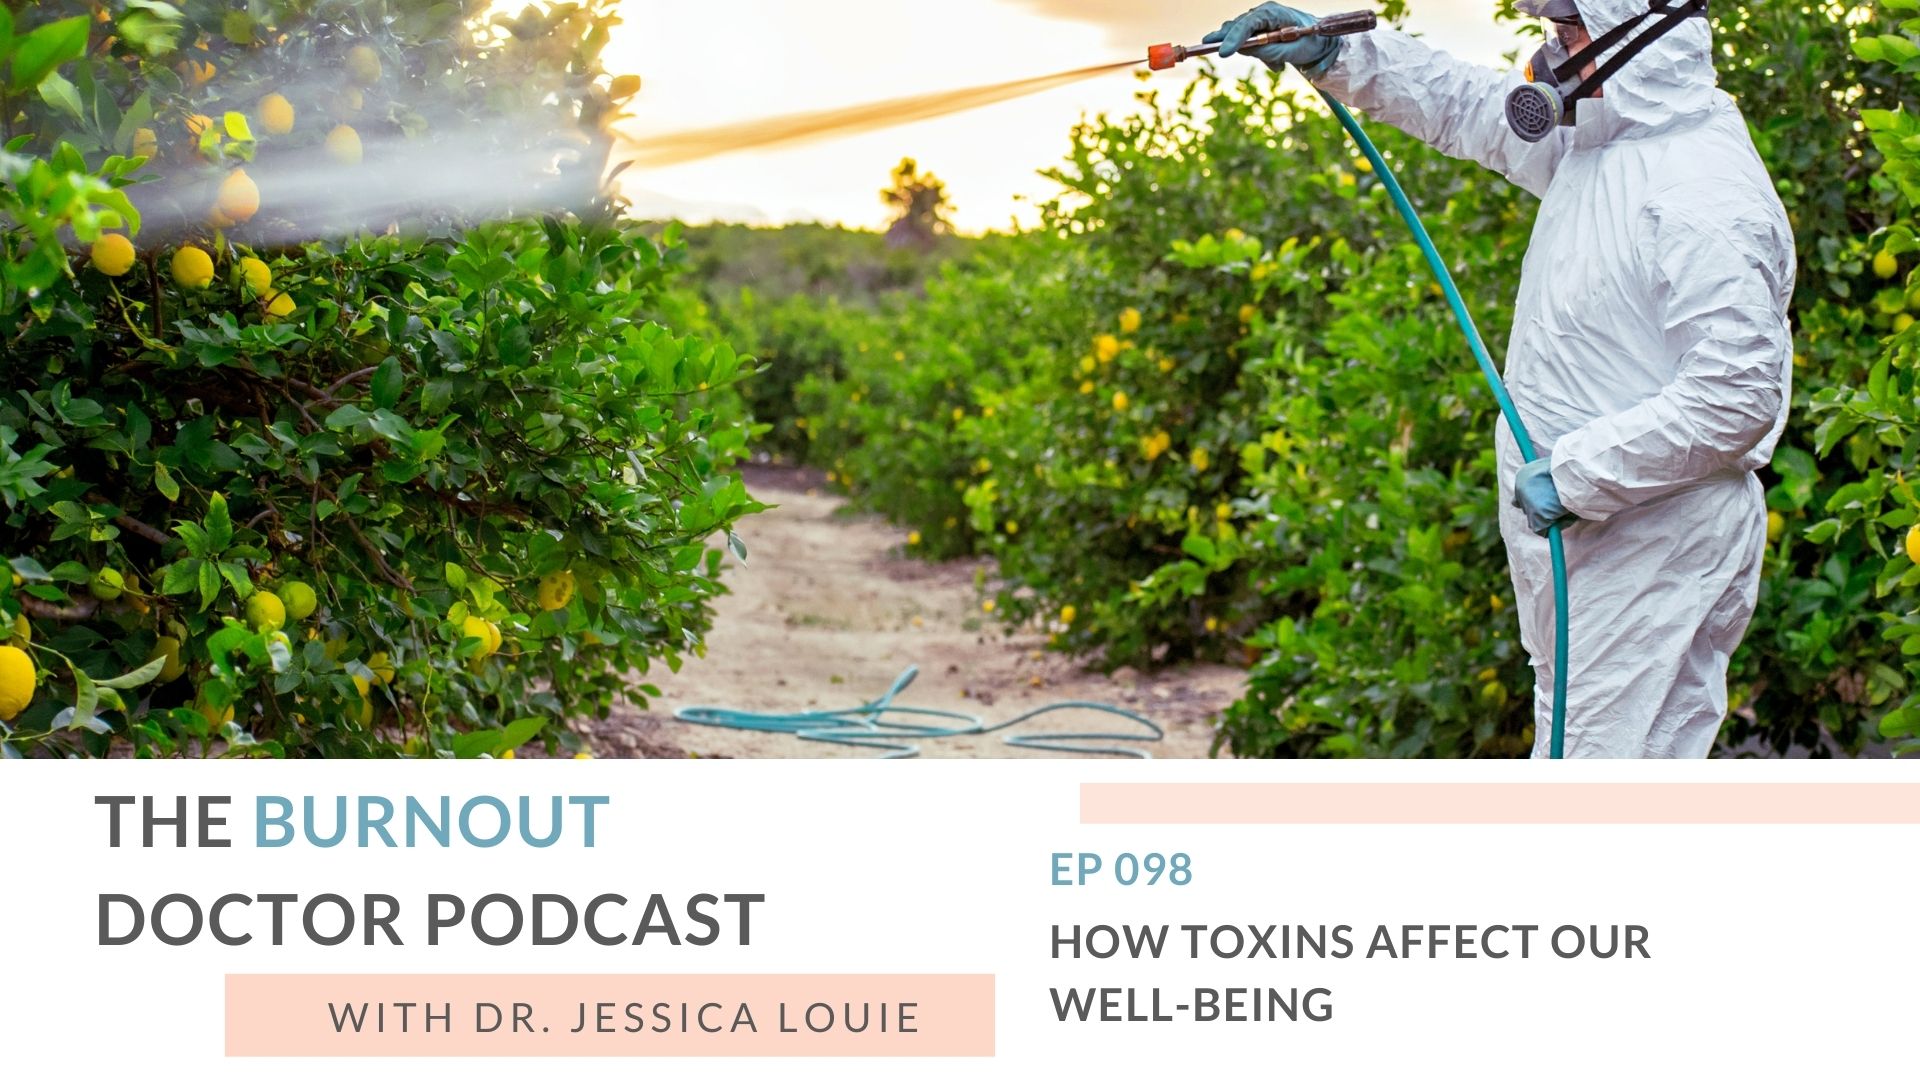 How Toxins affect our Well-being and Burnout. Eco-friendly non toxic living with Dr. Jessica Louie. The Burnout Doctor Podcast.